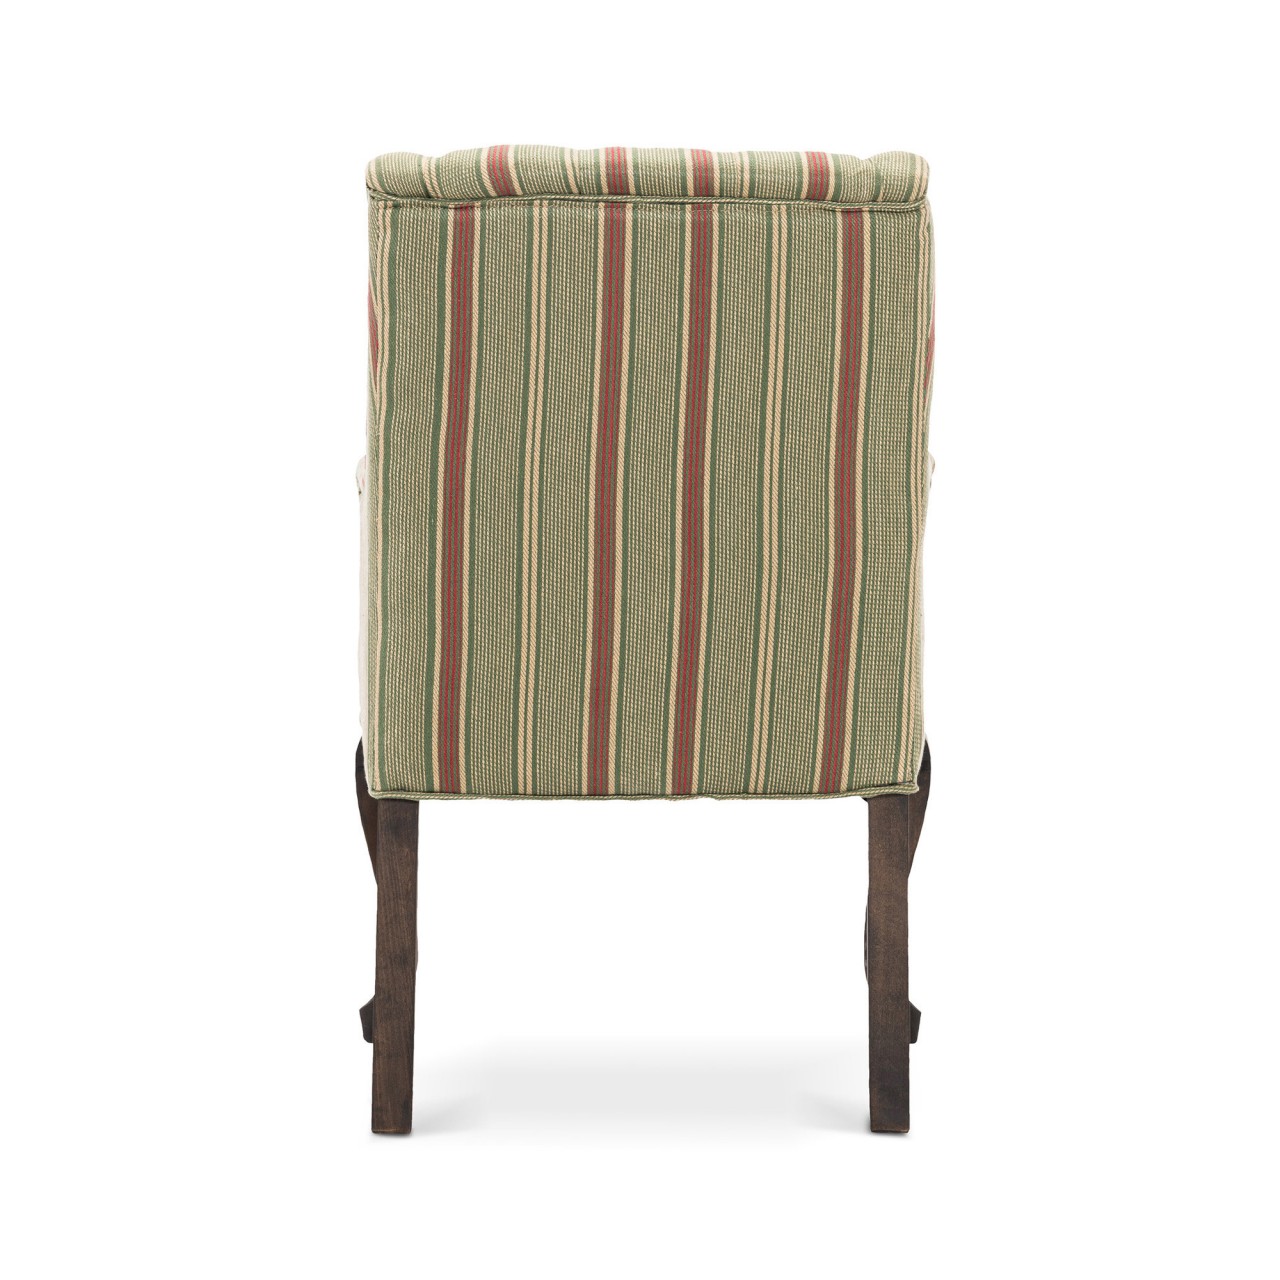 FITZROY TUFTED CHAIR - TYROLEAN STRIPES linen